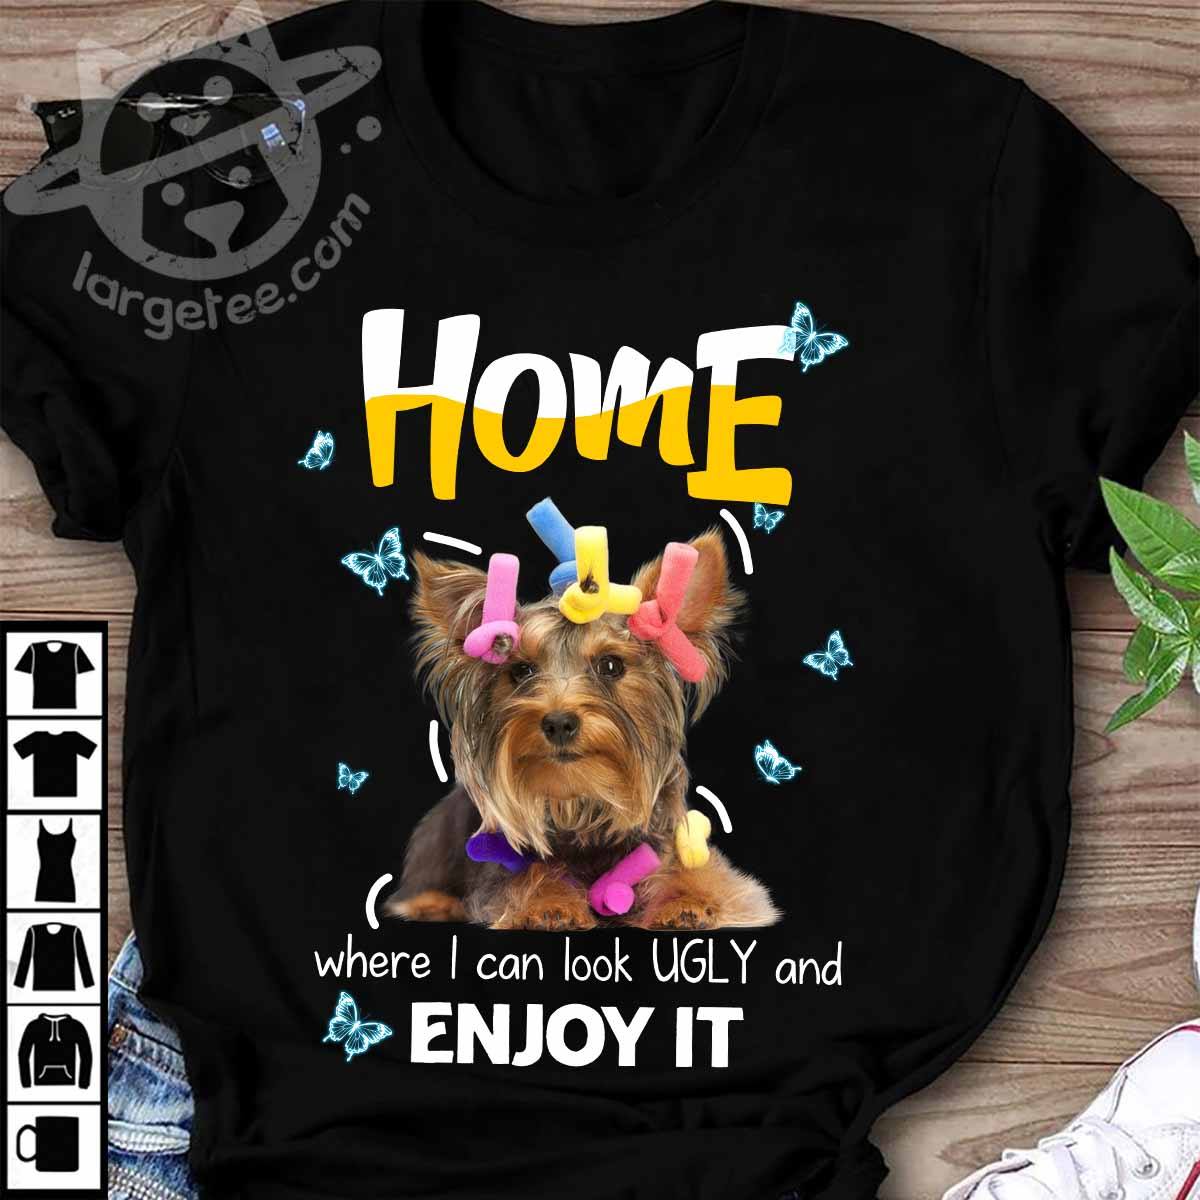 Home where I can look ugly and enjoy it - Pomeranian dog